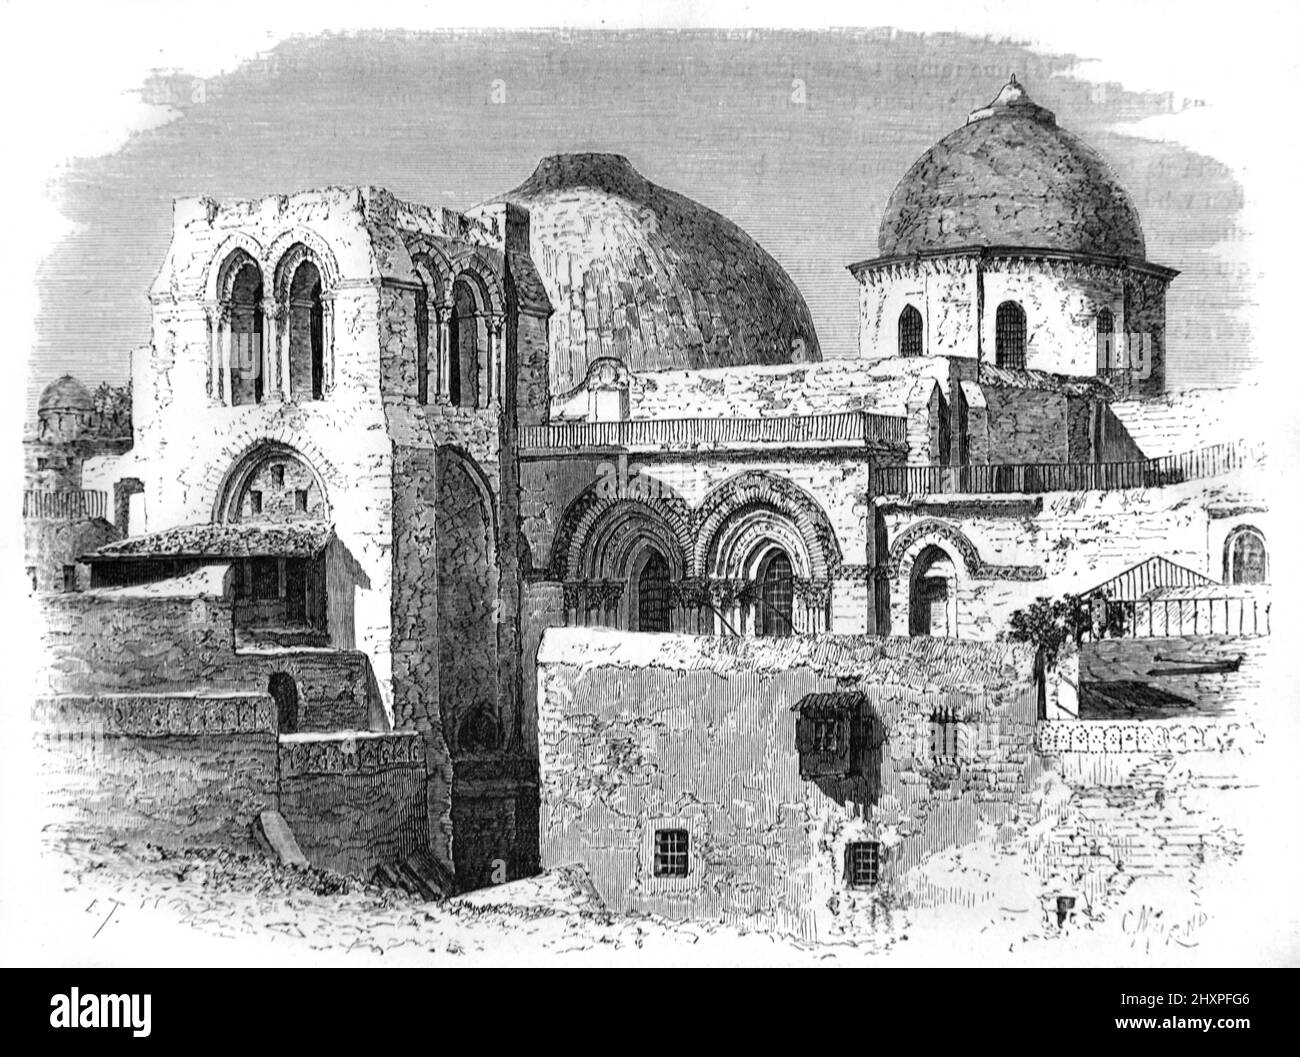 Church of the Holy Sepulchre, showing the c12th bell tower or belfry, the rotunda and catholicon domes, in the Christian Quarter of the Old City Jerusalem Israel. Vintage Illustration or Engraving 1860. Stock Photo